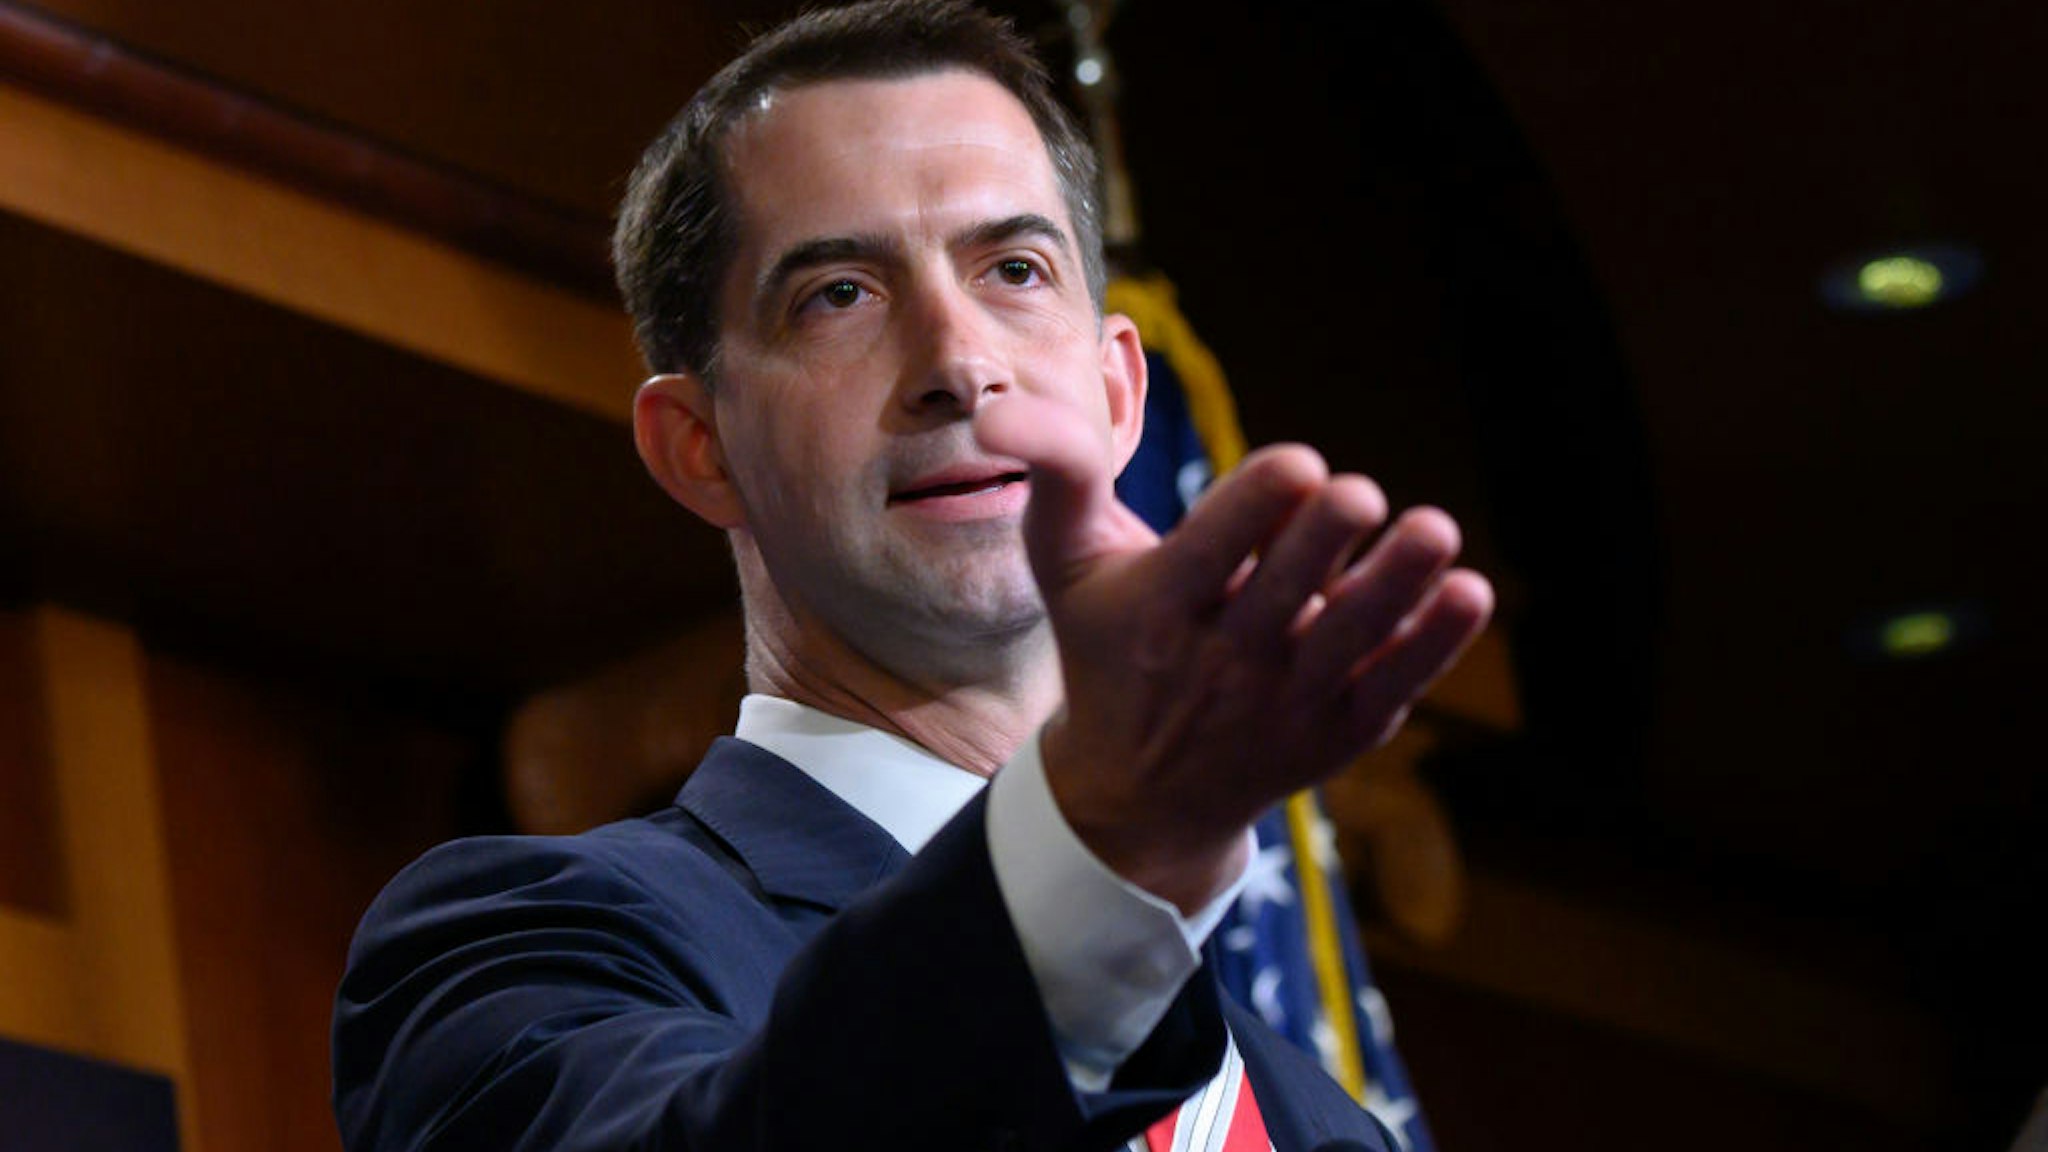 Senator Tom Cotton, a Republican from Arkansas, speaks during a news conference on Republican opposition to statehood for the District of Columbia at the U.S. Capitol in Washington, D.C., U.S., on Wednesday, July 1, 2020.